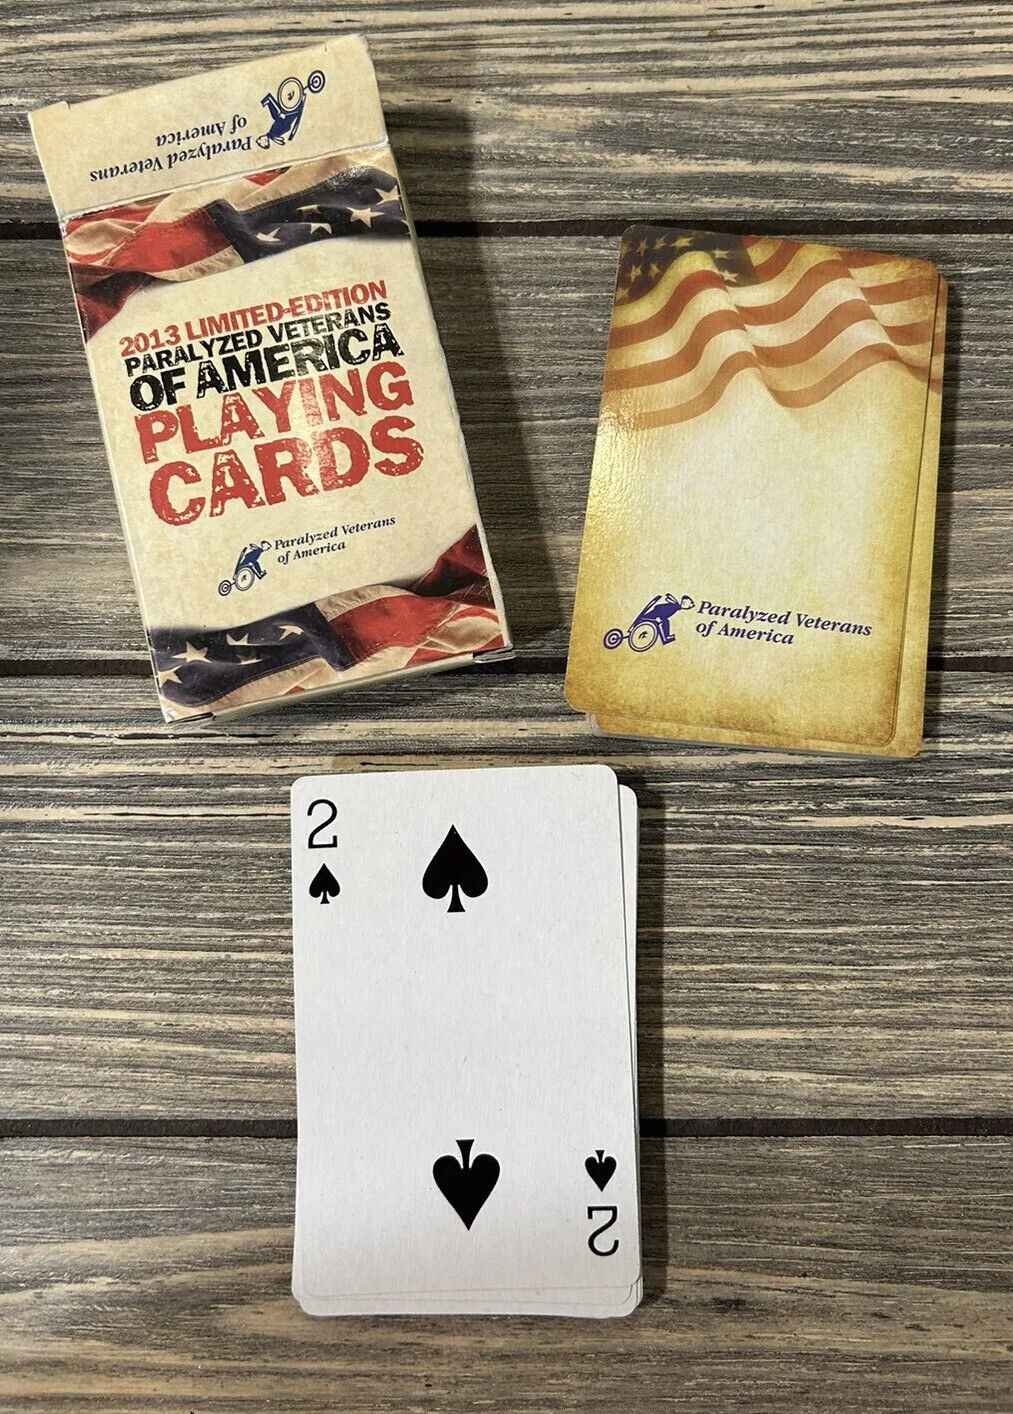 2013 Limited Edition Paralyzed Veterans Of America Playing Cards